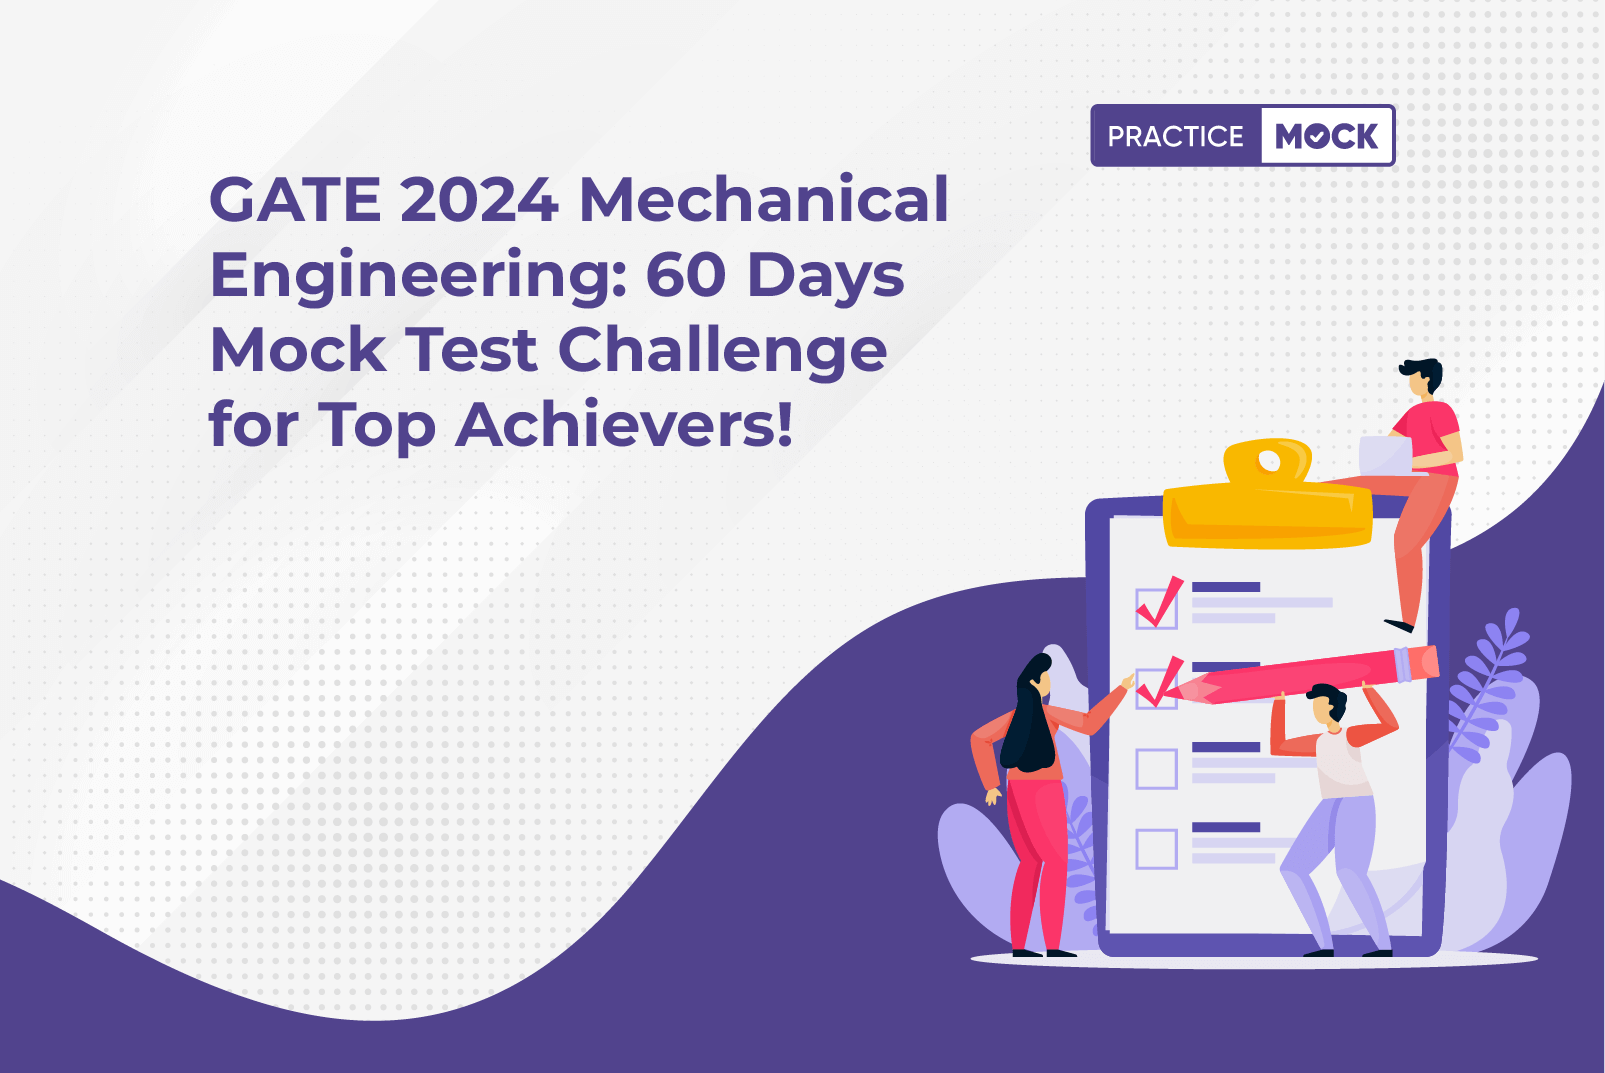 GATE 2024 Mechanical Engineering: 60 Days Mock Test Challenge for Top Achievers!